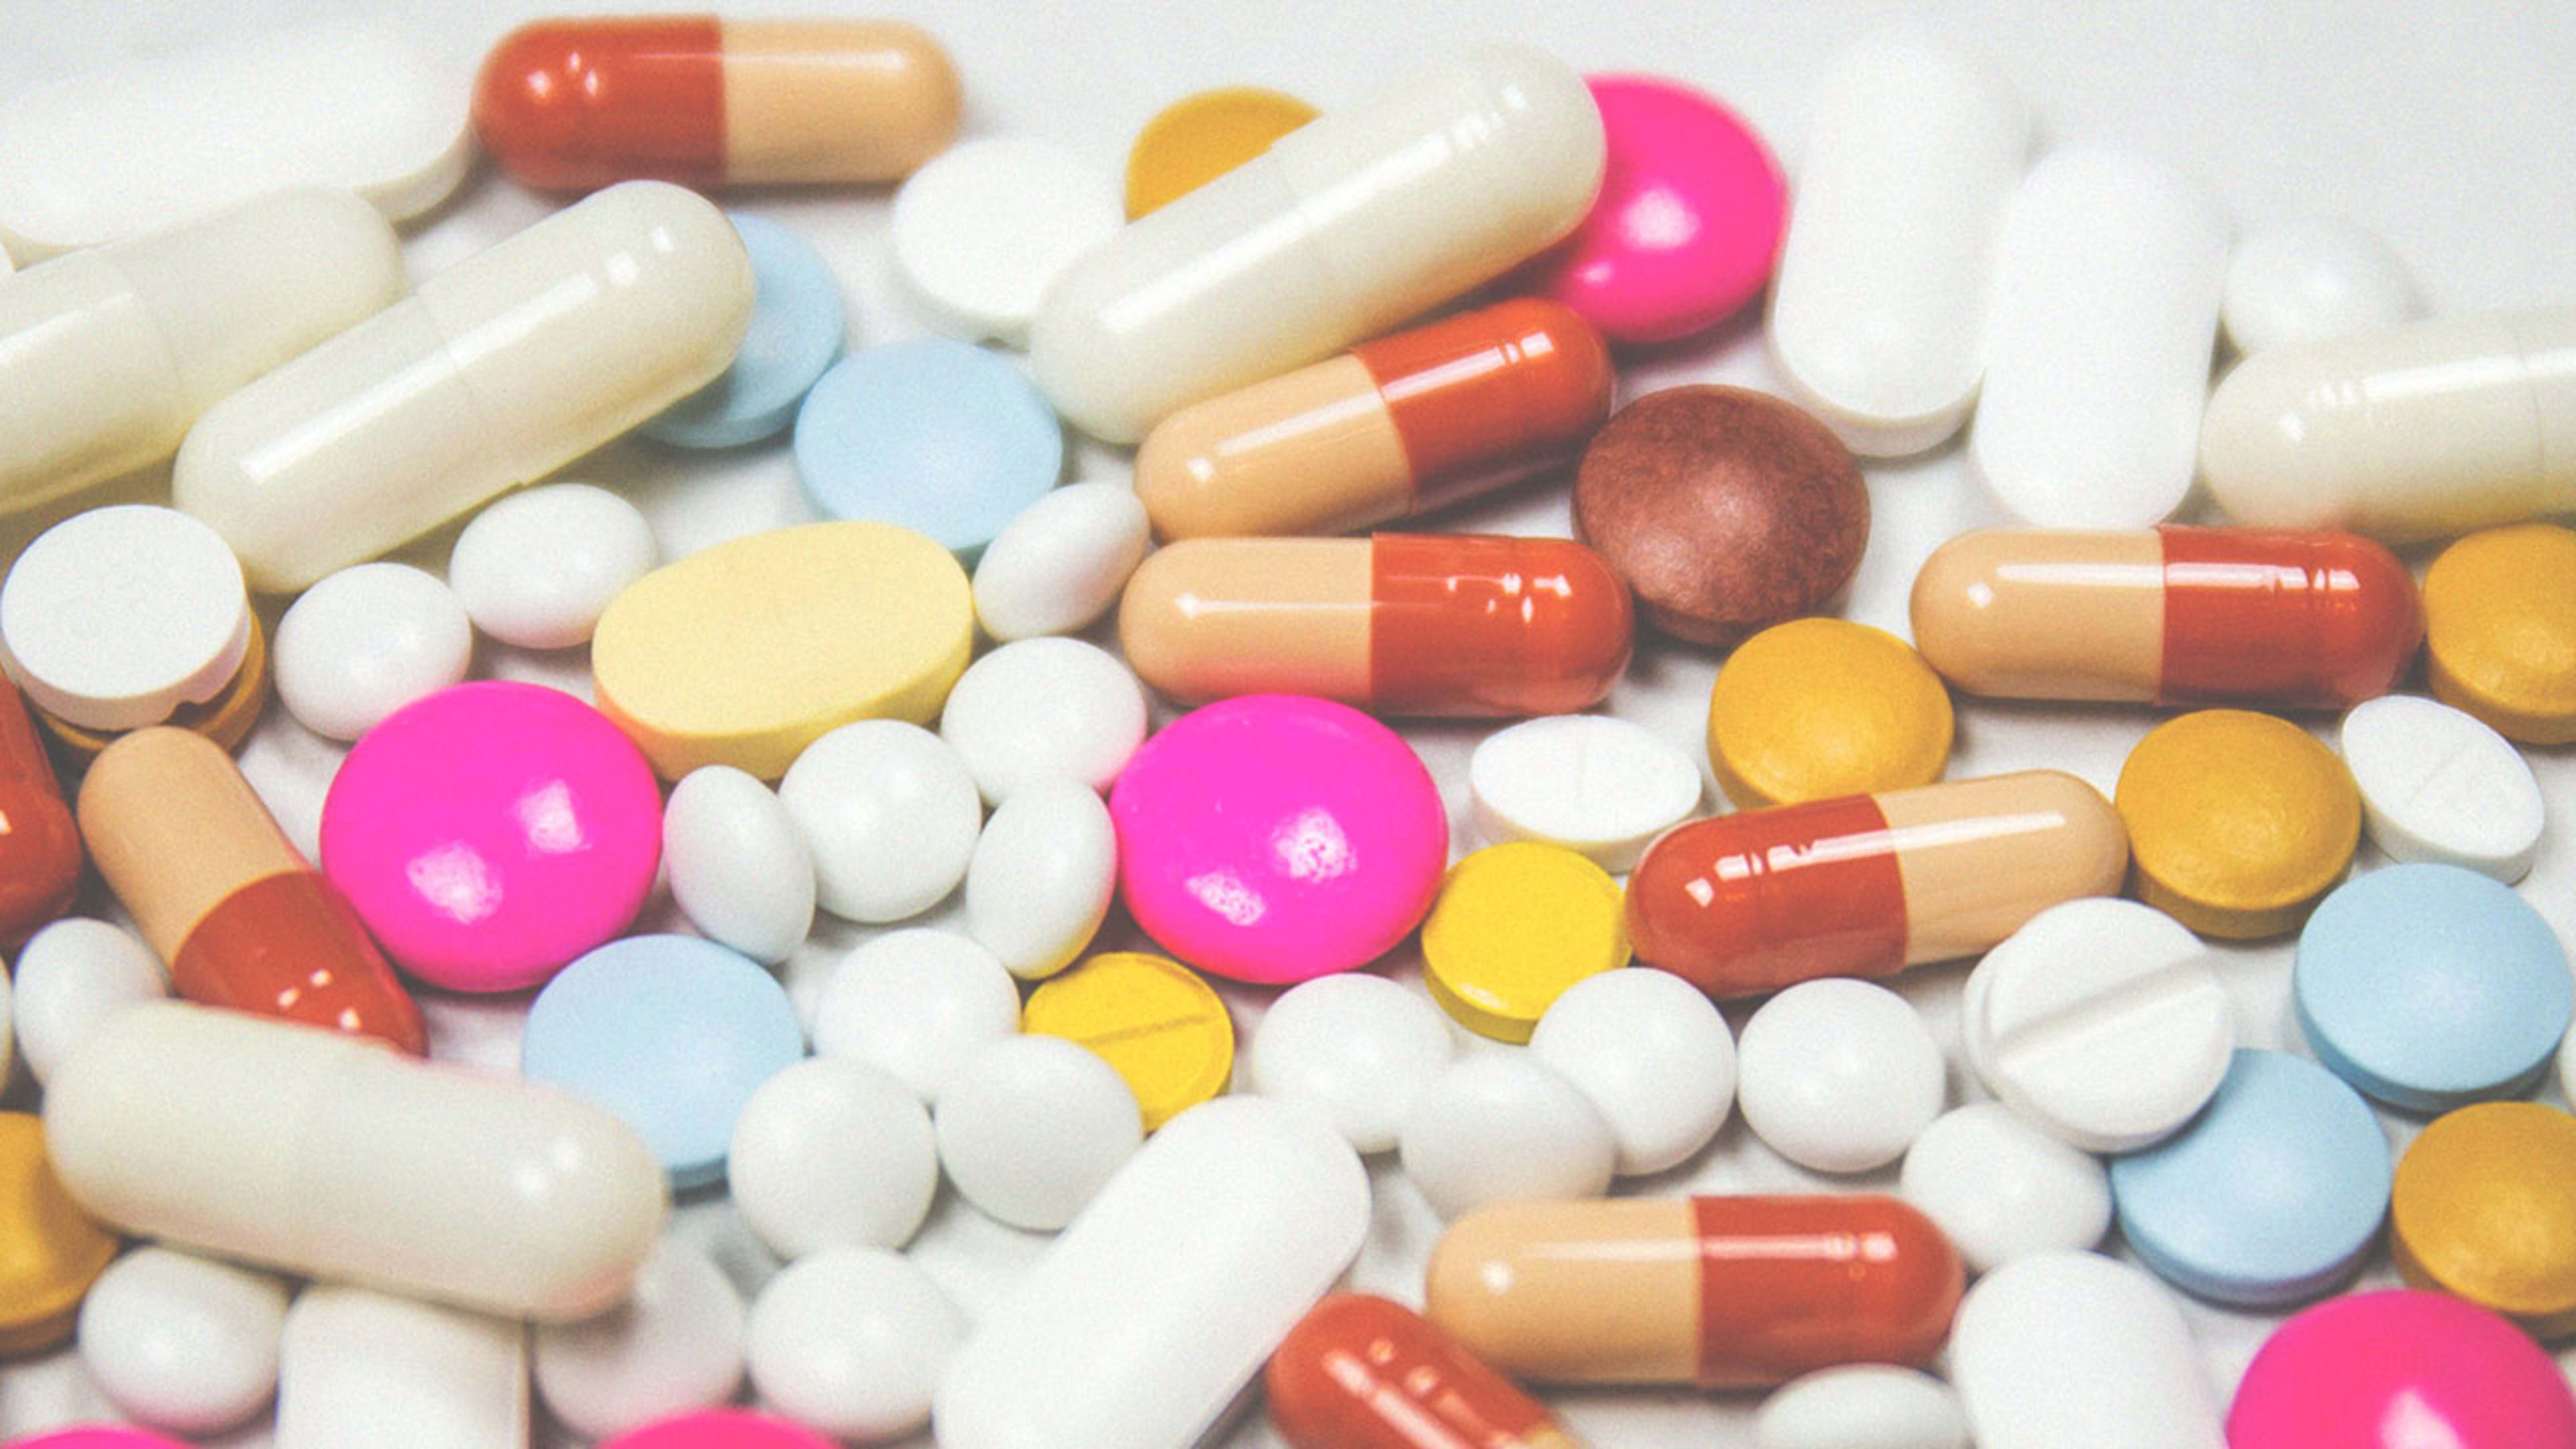 How Capsule’s Online Pharmacy Is Riding The Third Wave Of E-Commerce